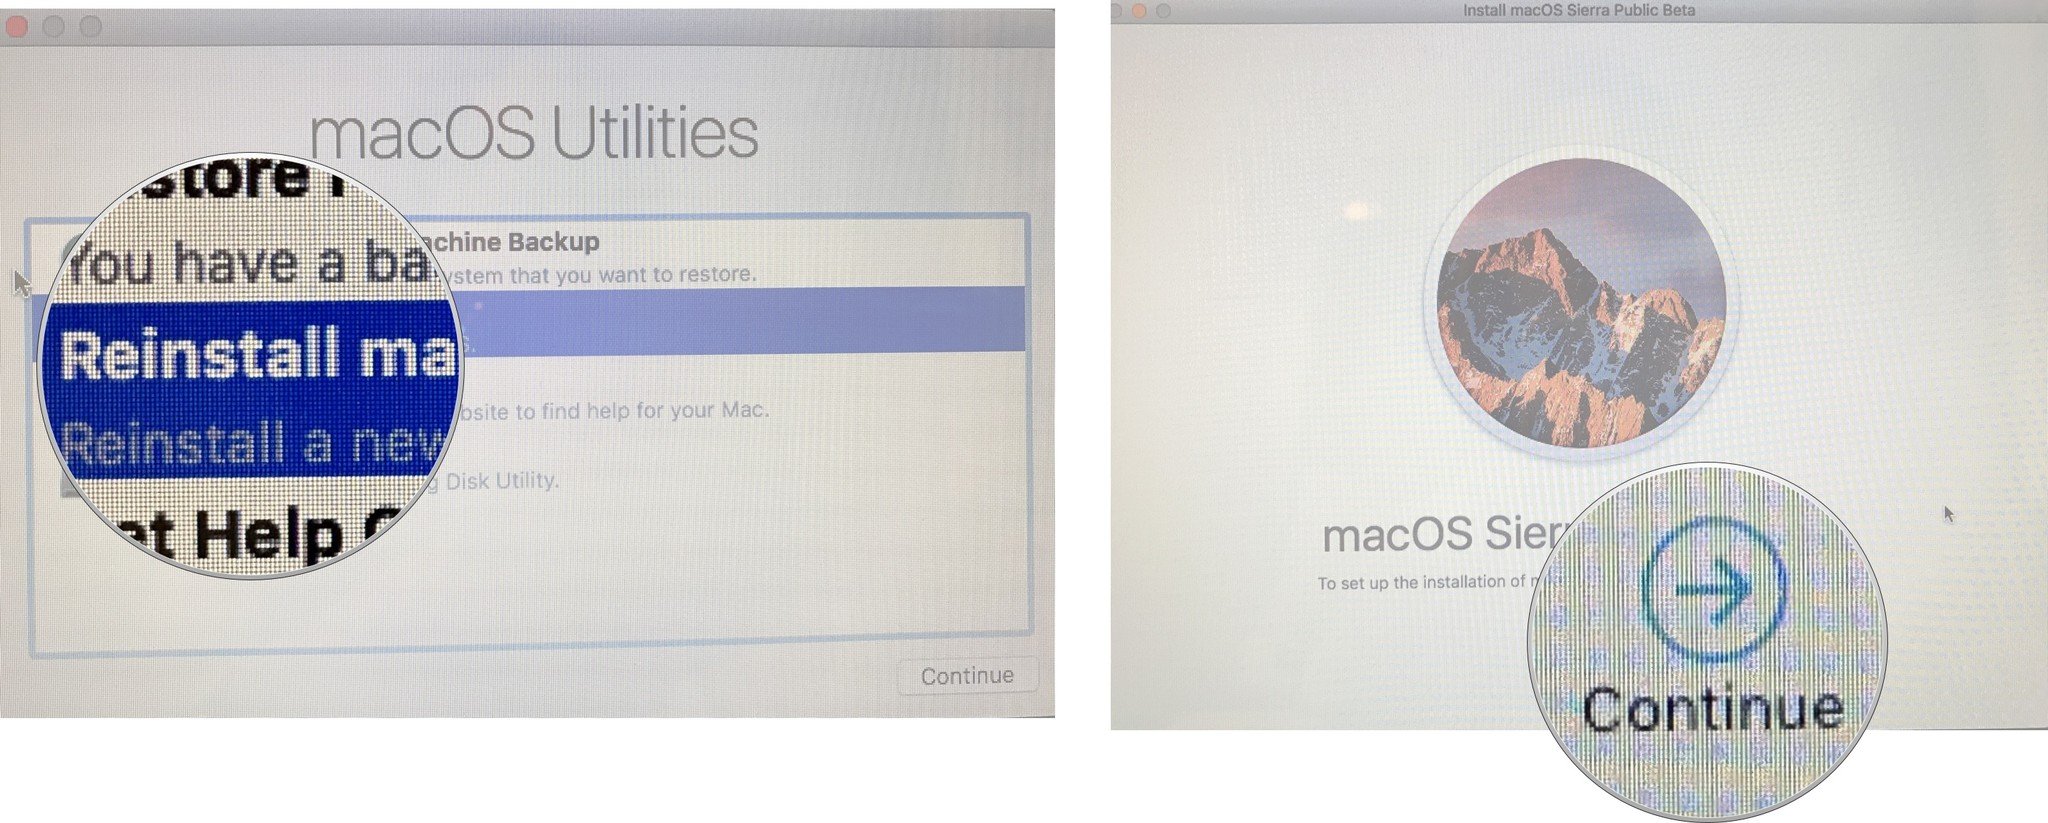 To reinstall a new copy, click Reinstall, then continue.